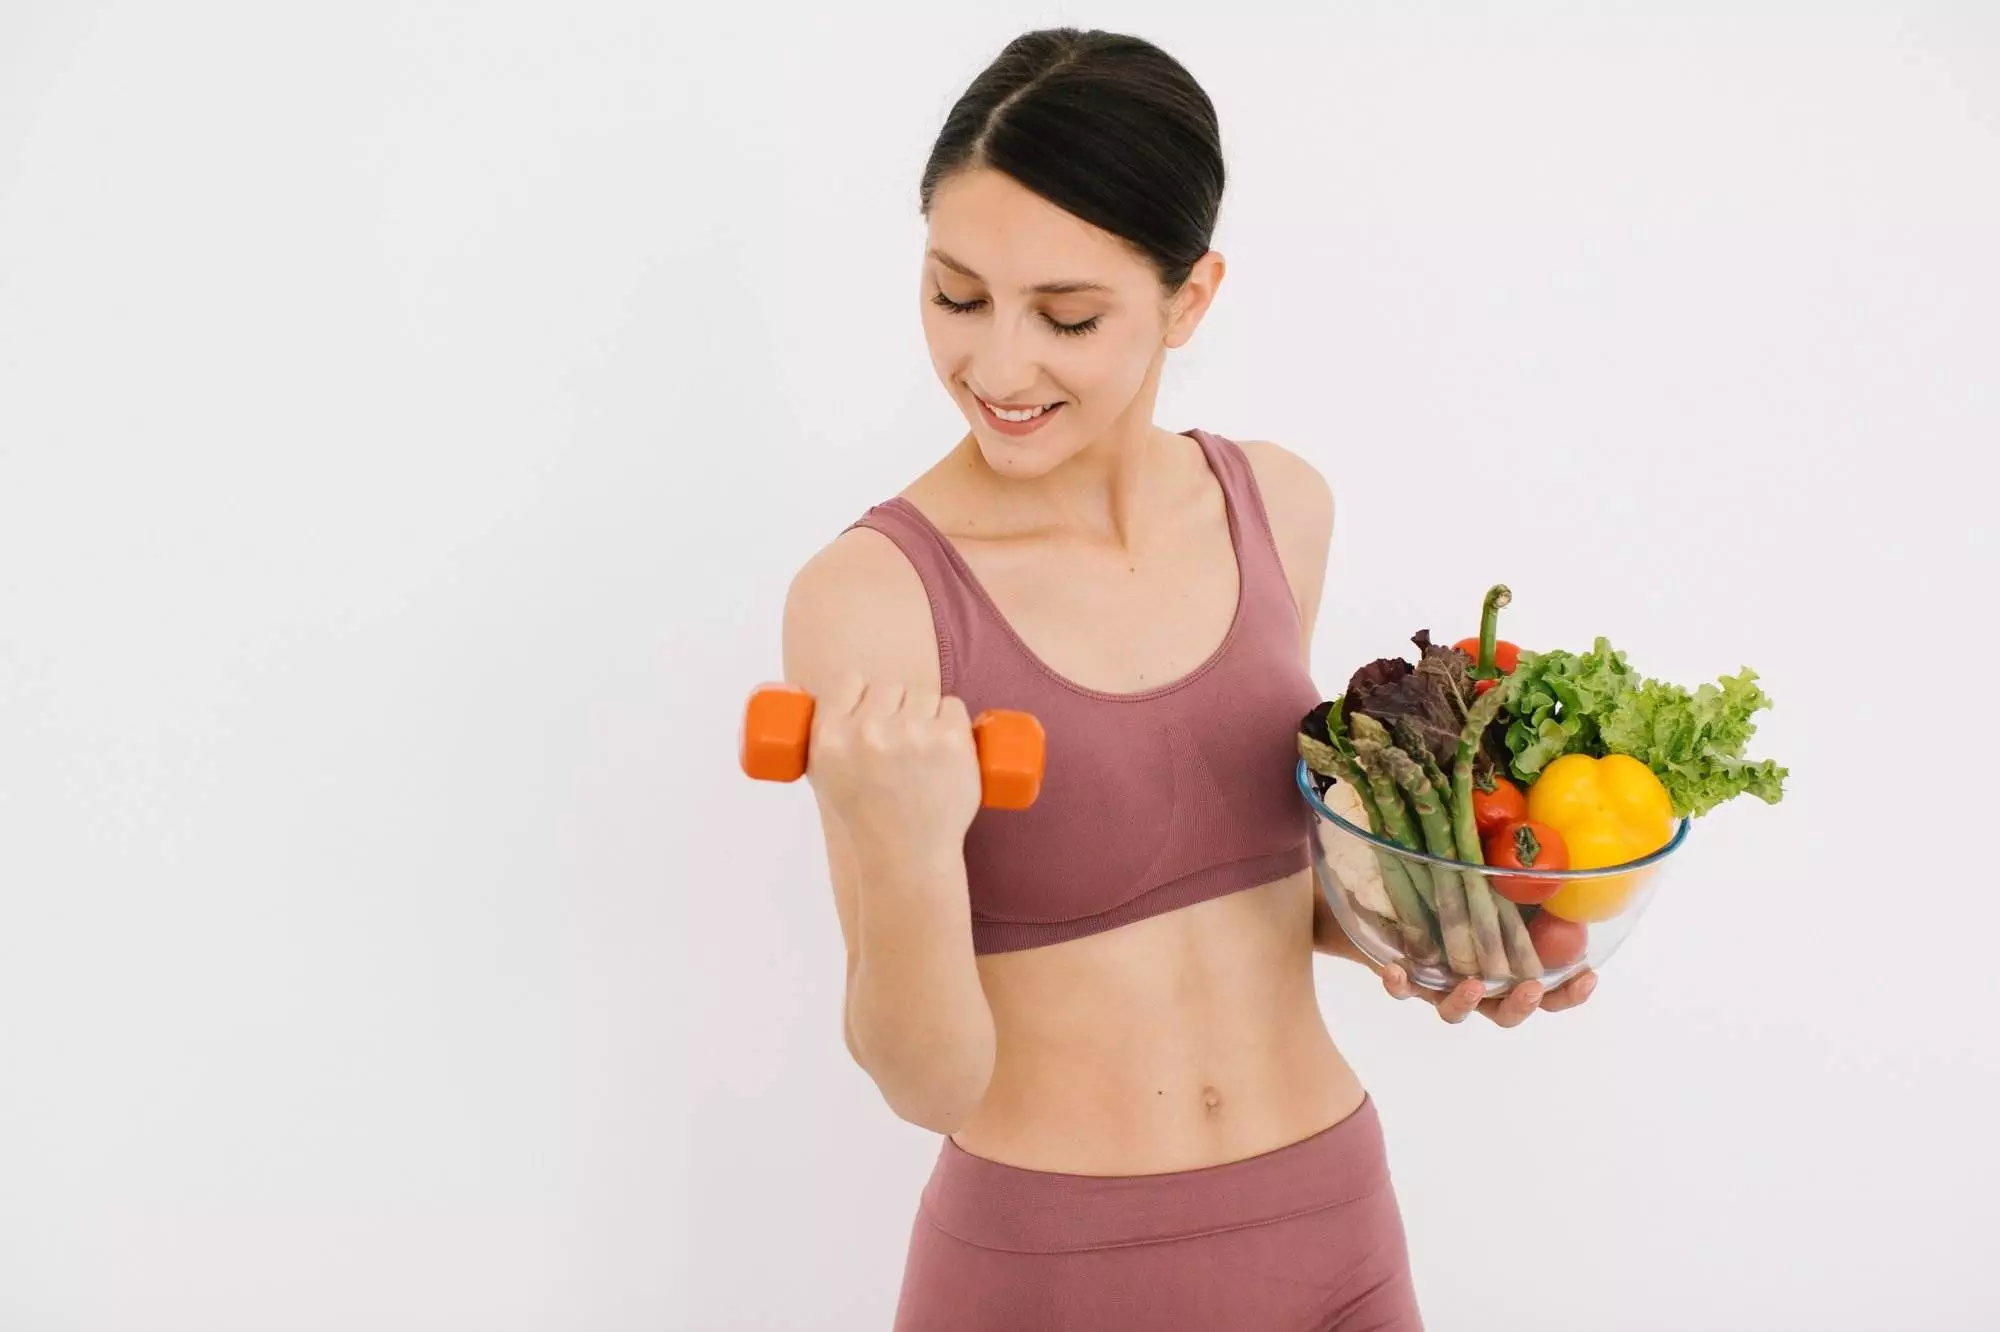 Woman exercising with dumbbell and holding healthy food.